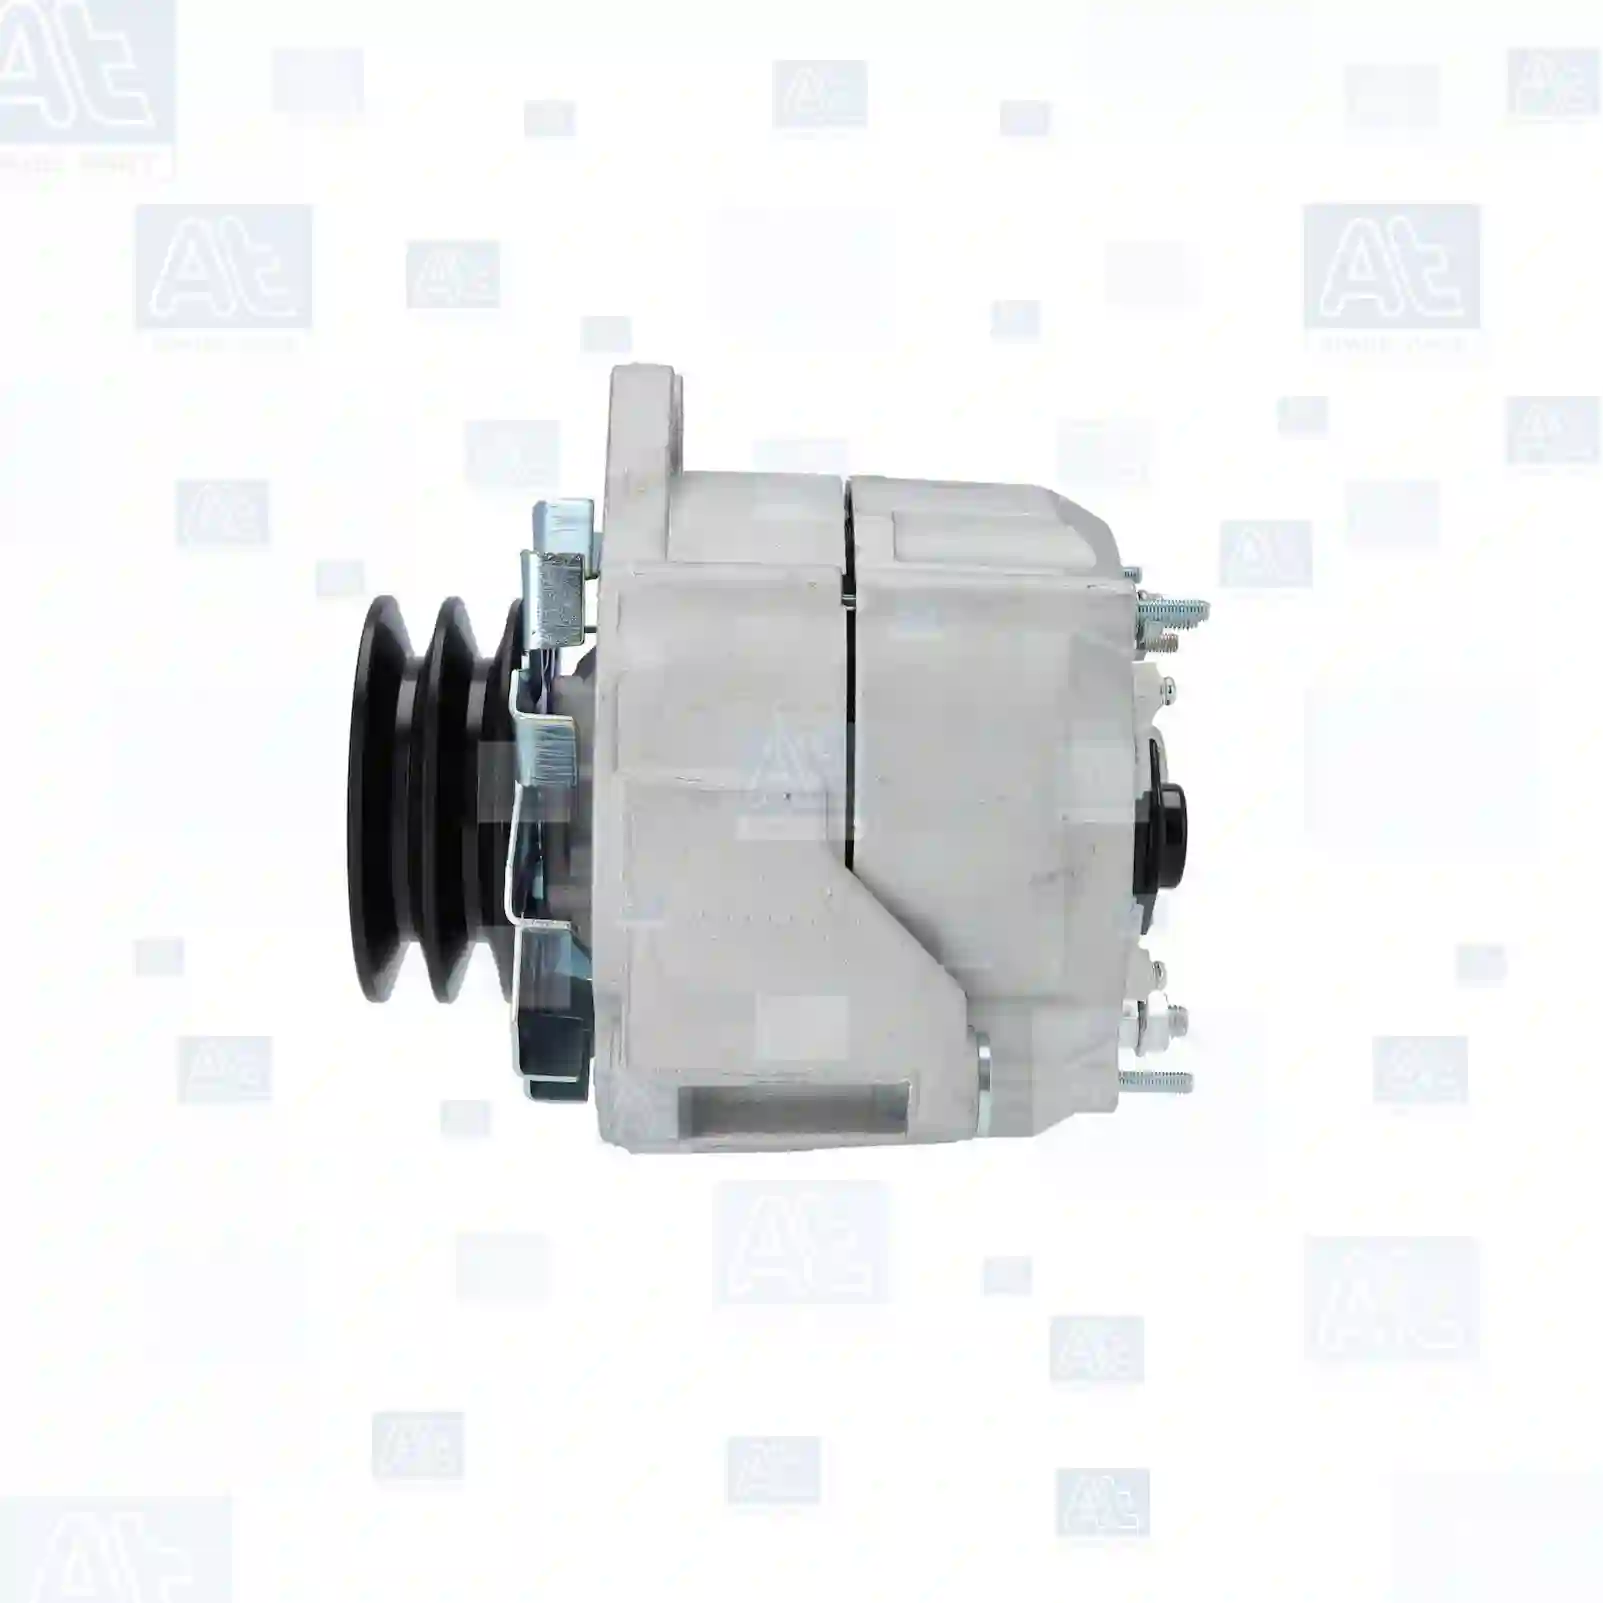 Alternator, at no 77710598, oem no: 060503192, 0091295, 1516402, 91295, 91295A, AEL8419, 01182113, 1800111446000, 08033366, 08007700, 08033366, 8007700, 8033366, 03040718, 1178511, 1182113, 3040718, 6290070, 51261017192, 51261017195, 51261019192, 81261017195, N1015000036, 0071549202, 007154920280, 007154920287, 0071549902, 0081544502, 3661502250, 2010217961, 5001837972, 5010217961, 91295, ZG20241-0008 At Spare Part | Engine, Accelerator Pedal, Camshaft, Connecting Rod, Crankcase, Crankshaft, Cylinder Head, Engine Suspension Mountings, Exhaust Manifold, Exhaust Gas Recirculation, Filter Kits, Flywheel Housing, General Overhaul Kits, Engine, Intake Manifold, Oil Cleaner, Oil Cooler, Oil Filter, Oil Pump, Oil Sump, Piston & Liner, Sensor & Switch, Timing Case, Turbocharger, Cooling System, Belt Tensioner, Coolant Filter, Coolant Pipe, Corrosion Prevention Agent, Drive, Expansion Tank, Fan, Intercooler, Monitors & Gauges, Radiator, Thermostat, V-Belt / Timing belt, Water Pump, Fuel System, Electronical Injector Unit, Feed Pump, Fuel Filter, cpl., Fuel Gauge Sender,  Fuel Line, Fuel Pump, Fuel Tank, Injection Line Kit, Injection Pump, Exhaust System, Clutch & Pedal, Gearbox, Propeller Shaft, Axles, Brake System, Hubs & Wheels, Suspension, Leaf Spring, Universal Parts / Accessories, Steering, Electrical System, Cabin Alternator, at no 77710598, oem no: 060503192, 0091295, 1516402, 91295, 91295A, AEL8419, 01182113, 1800111446000, 08033366, 08007700, 08033366, 8007700, 8033366, 03040718, 1178511, 1182113, 3040718, 6290070, 51261017192, 51261017195, 51261019192, 81261017195, N1015000036, 0071549202, 007154920280, 007154920287, 0071549902, 0081544502, 3661502250, 2010217961, 5001837972, 5010217961, 91295, ZG20241-0008 At Spare Part | Engine, Accelerator Pedal, Camshaft, Connecting Rod, Crankcase, Crankshaft, Cylinder Head, Engine Suspension Mountings, Exhaust Manifold, Exhaust Gas Recirculation, Filter Kits, Flywheel Housing, General Overhaul Kits, Engine, Intake Manifold, Oil Cleaner, Oil Cooler, Oil Filter, Oil Pump, Oil Sump, Piston & Liner, Sensor & Switch, Timing Case, Turbocharger, Cooling System, Belt Tensioner, Coolant Filter, Coolant Pipe, Corrosion Prevention Agent, Drive, Expansion Tank, Fan, Intercooler, Monitors & Gauges, Radiator, Thermostat, V-Belt / Timing belt, Water Pump, Fuel System, Electronical Injector Unit, Feed Pump, Fuel Filter, cpl., Fuel Gauge Sender,  Fuel Line, Fuel Pump, Fuel Tank, Injection Line Kit, Injection Pump, Exhaust System, Clutch & Pedal, Gearbox, Propeller Shaft, Axles, Brake System, Hubs & Wheels, Suspension, Leaf Spring, Universal Parts / Accessories, Steering, Electrical System, Cabin